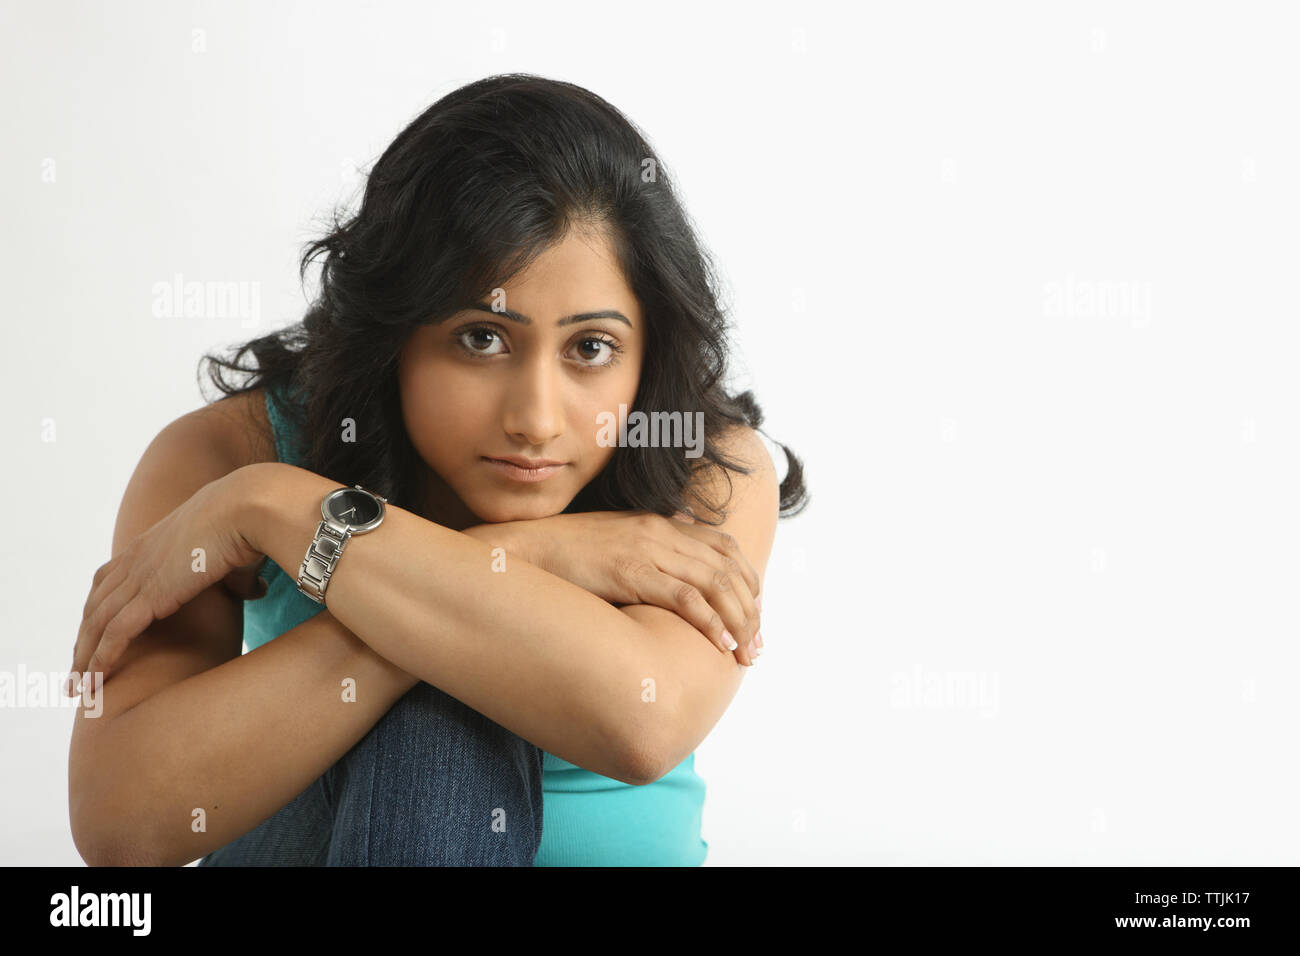 Portrait of an Indian woman hugging her knees Stock Photo